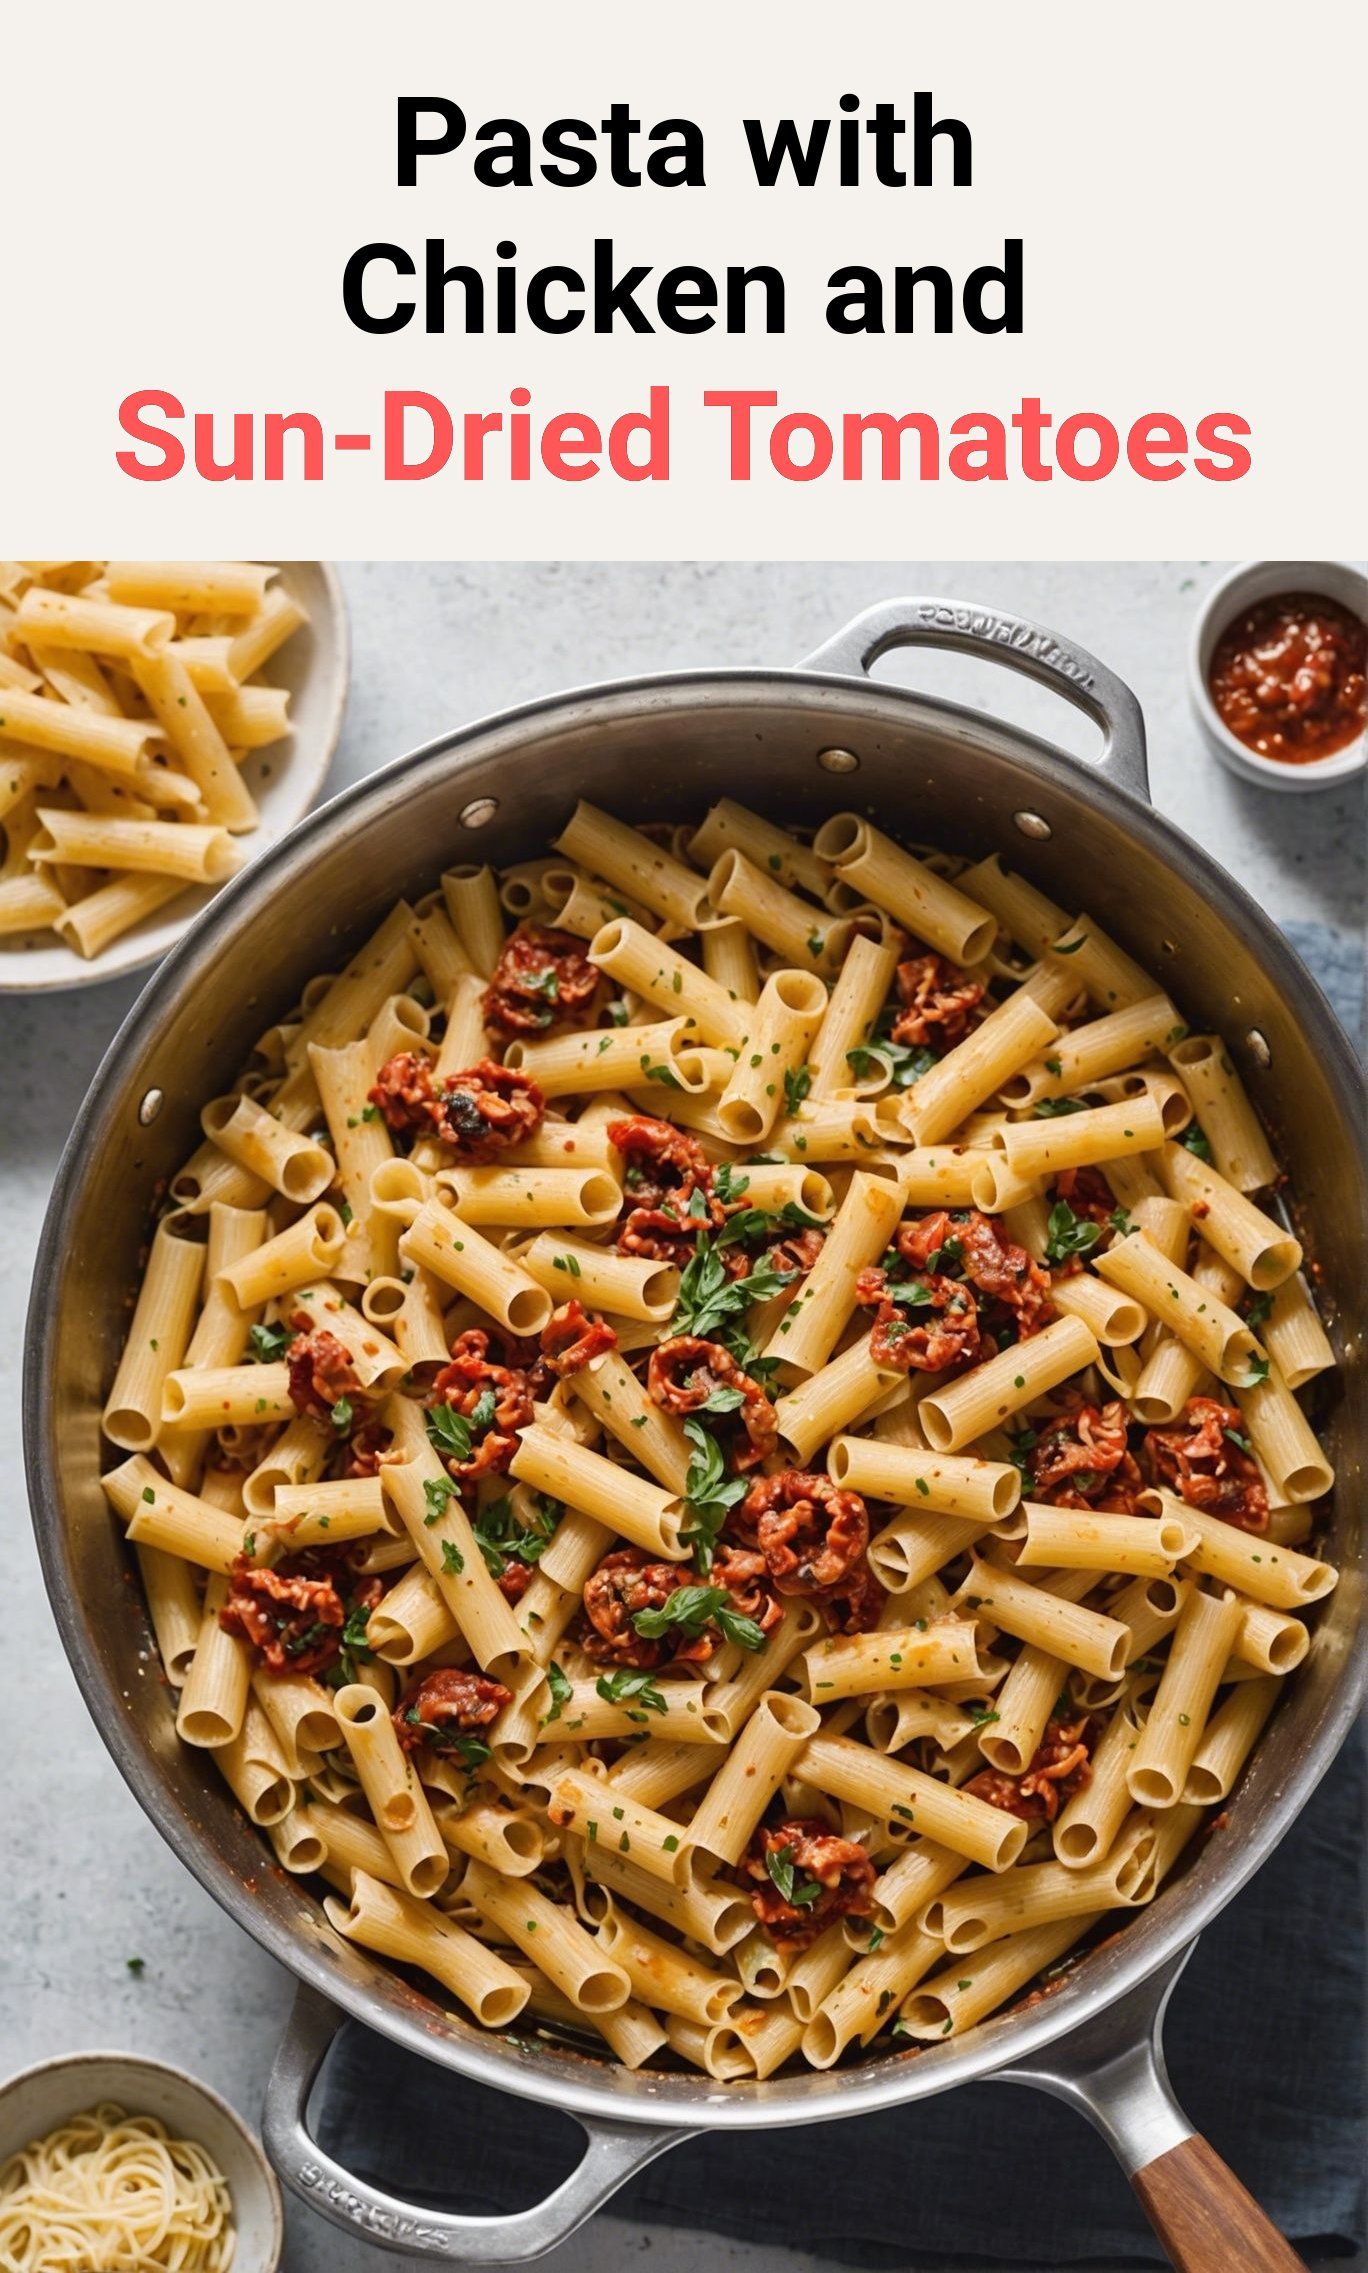 Pasta With Chicken And Sun-Dried Tomatoes – The Delish Recipe